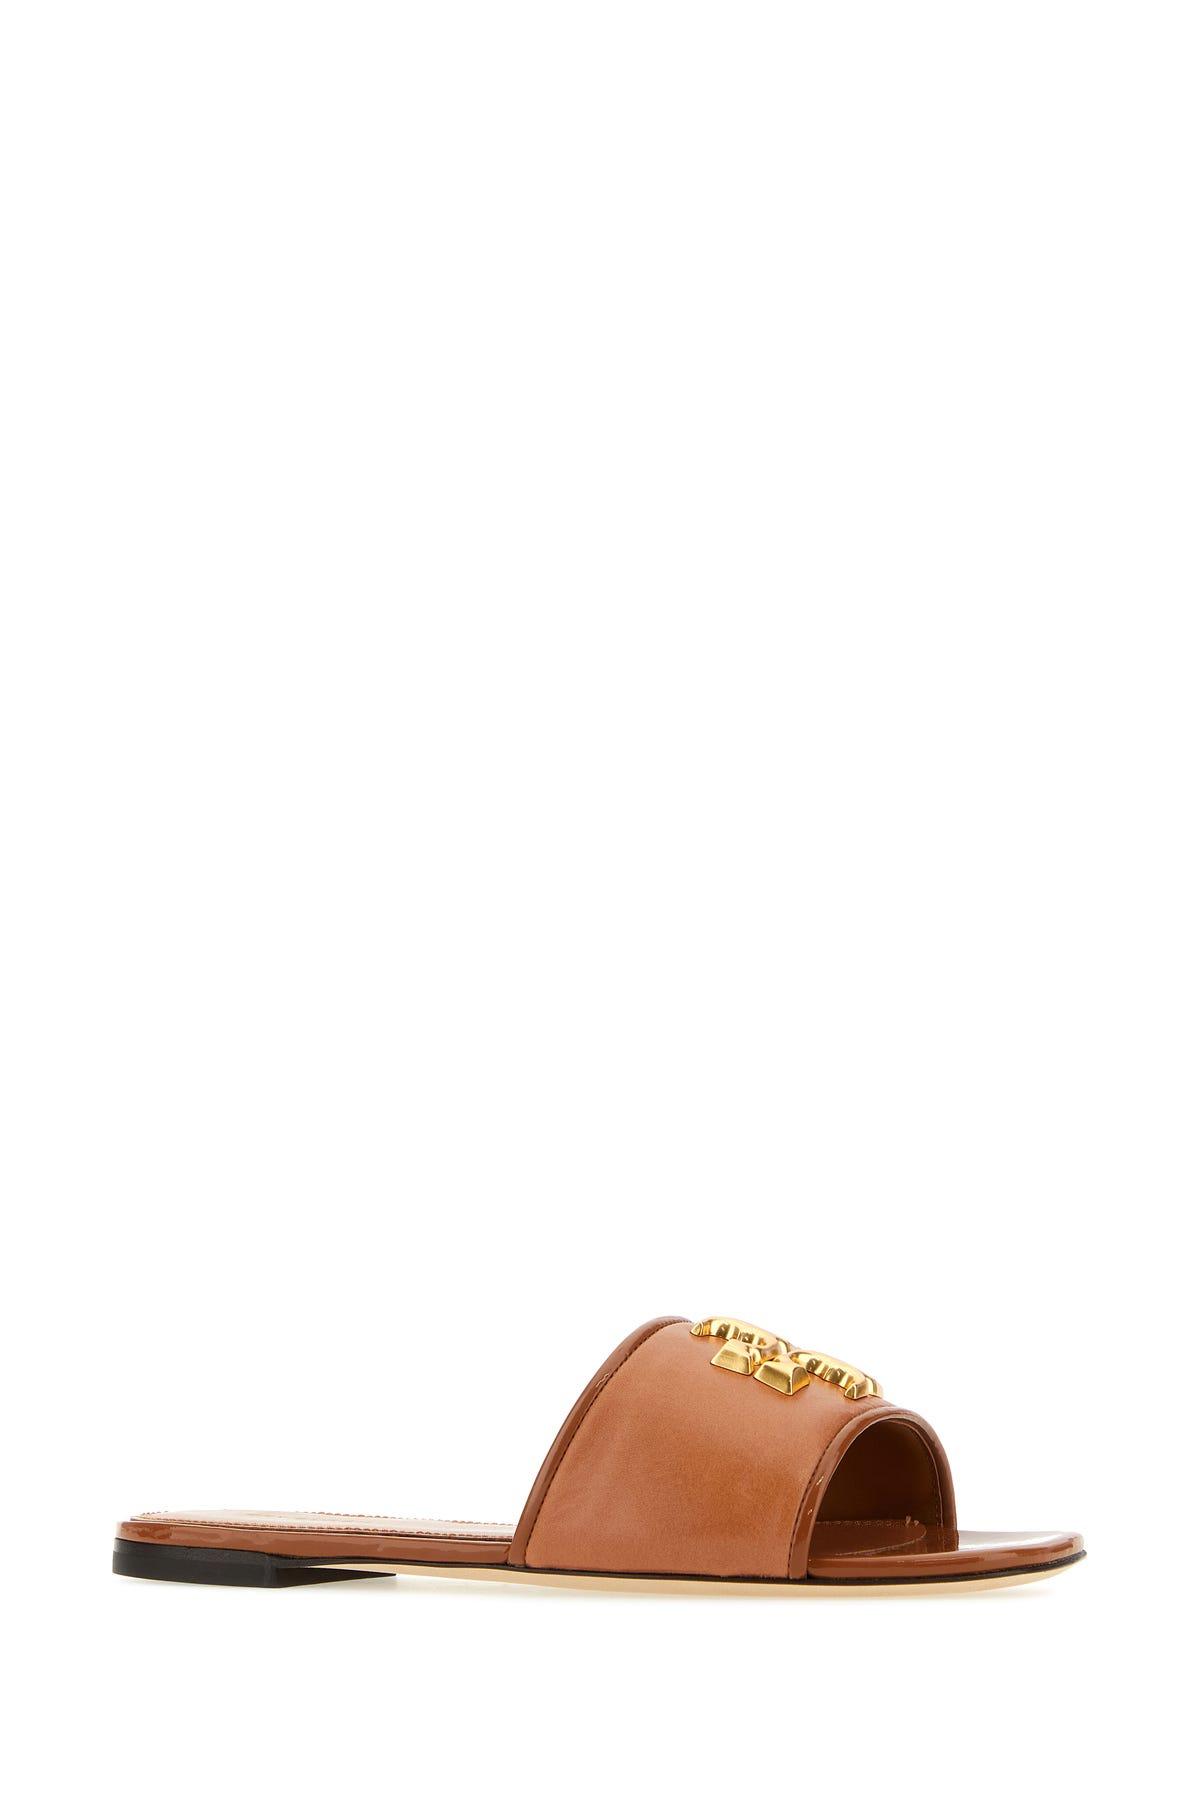 Tory Burch Slippers in Brown | Lyst